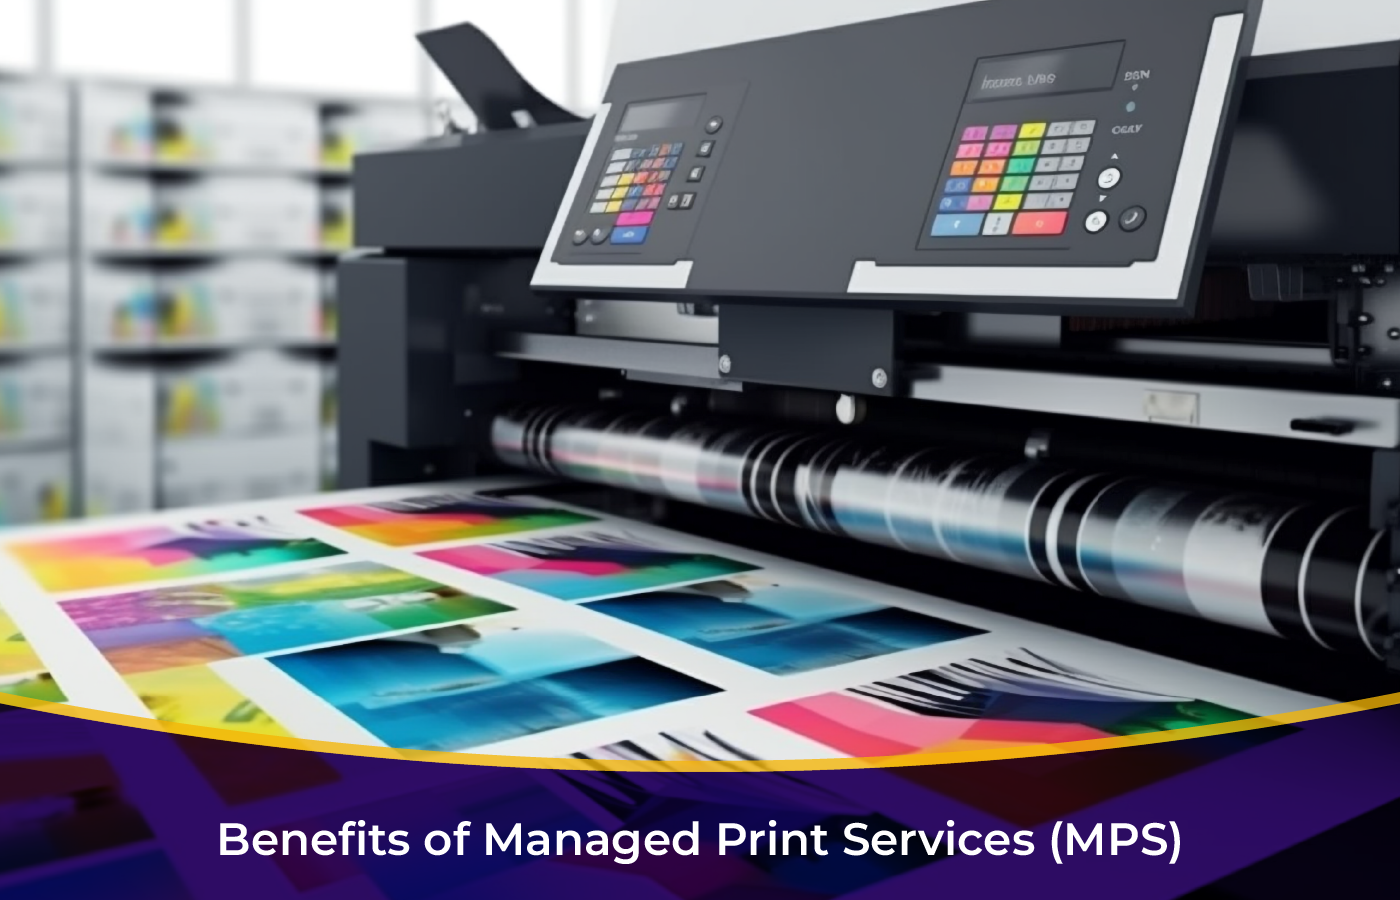 Benefits of Managed Print Services (MPS)